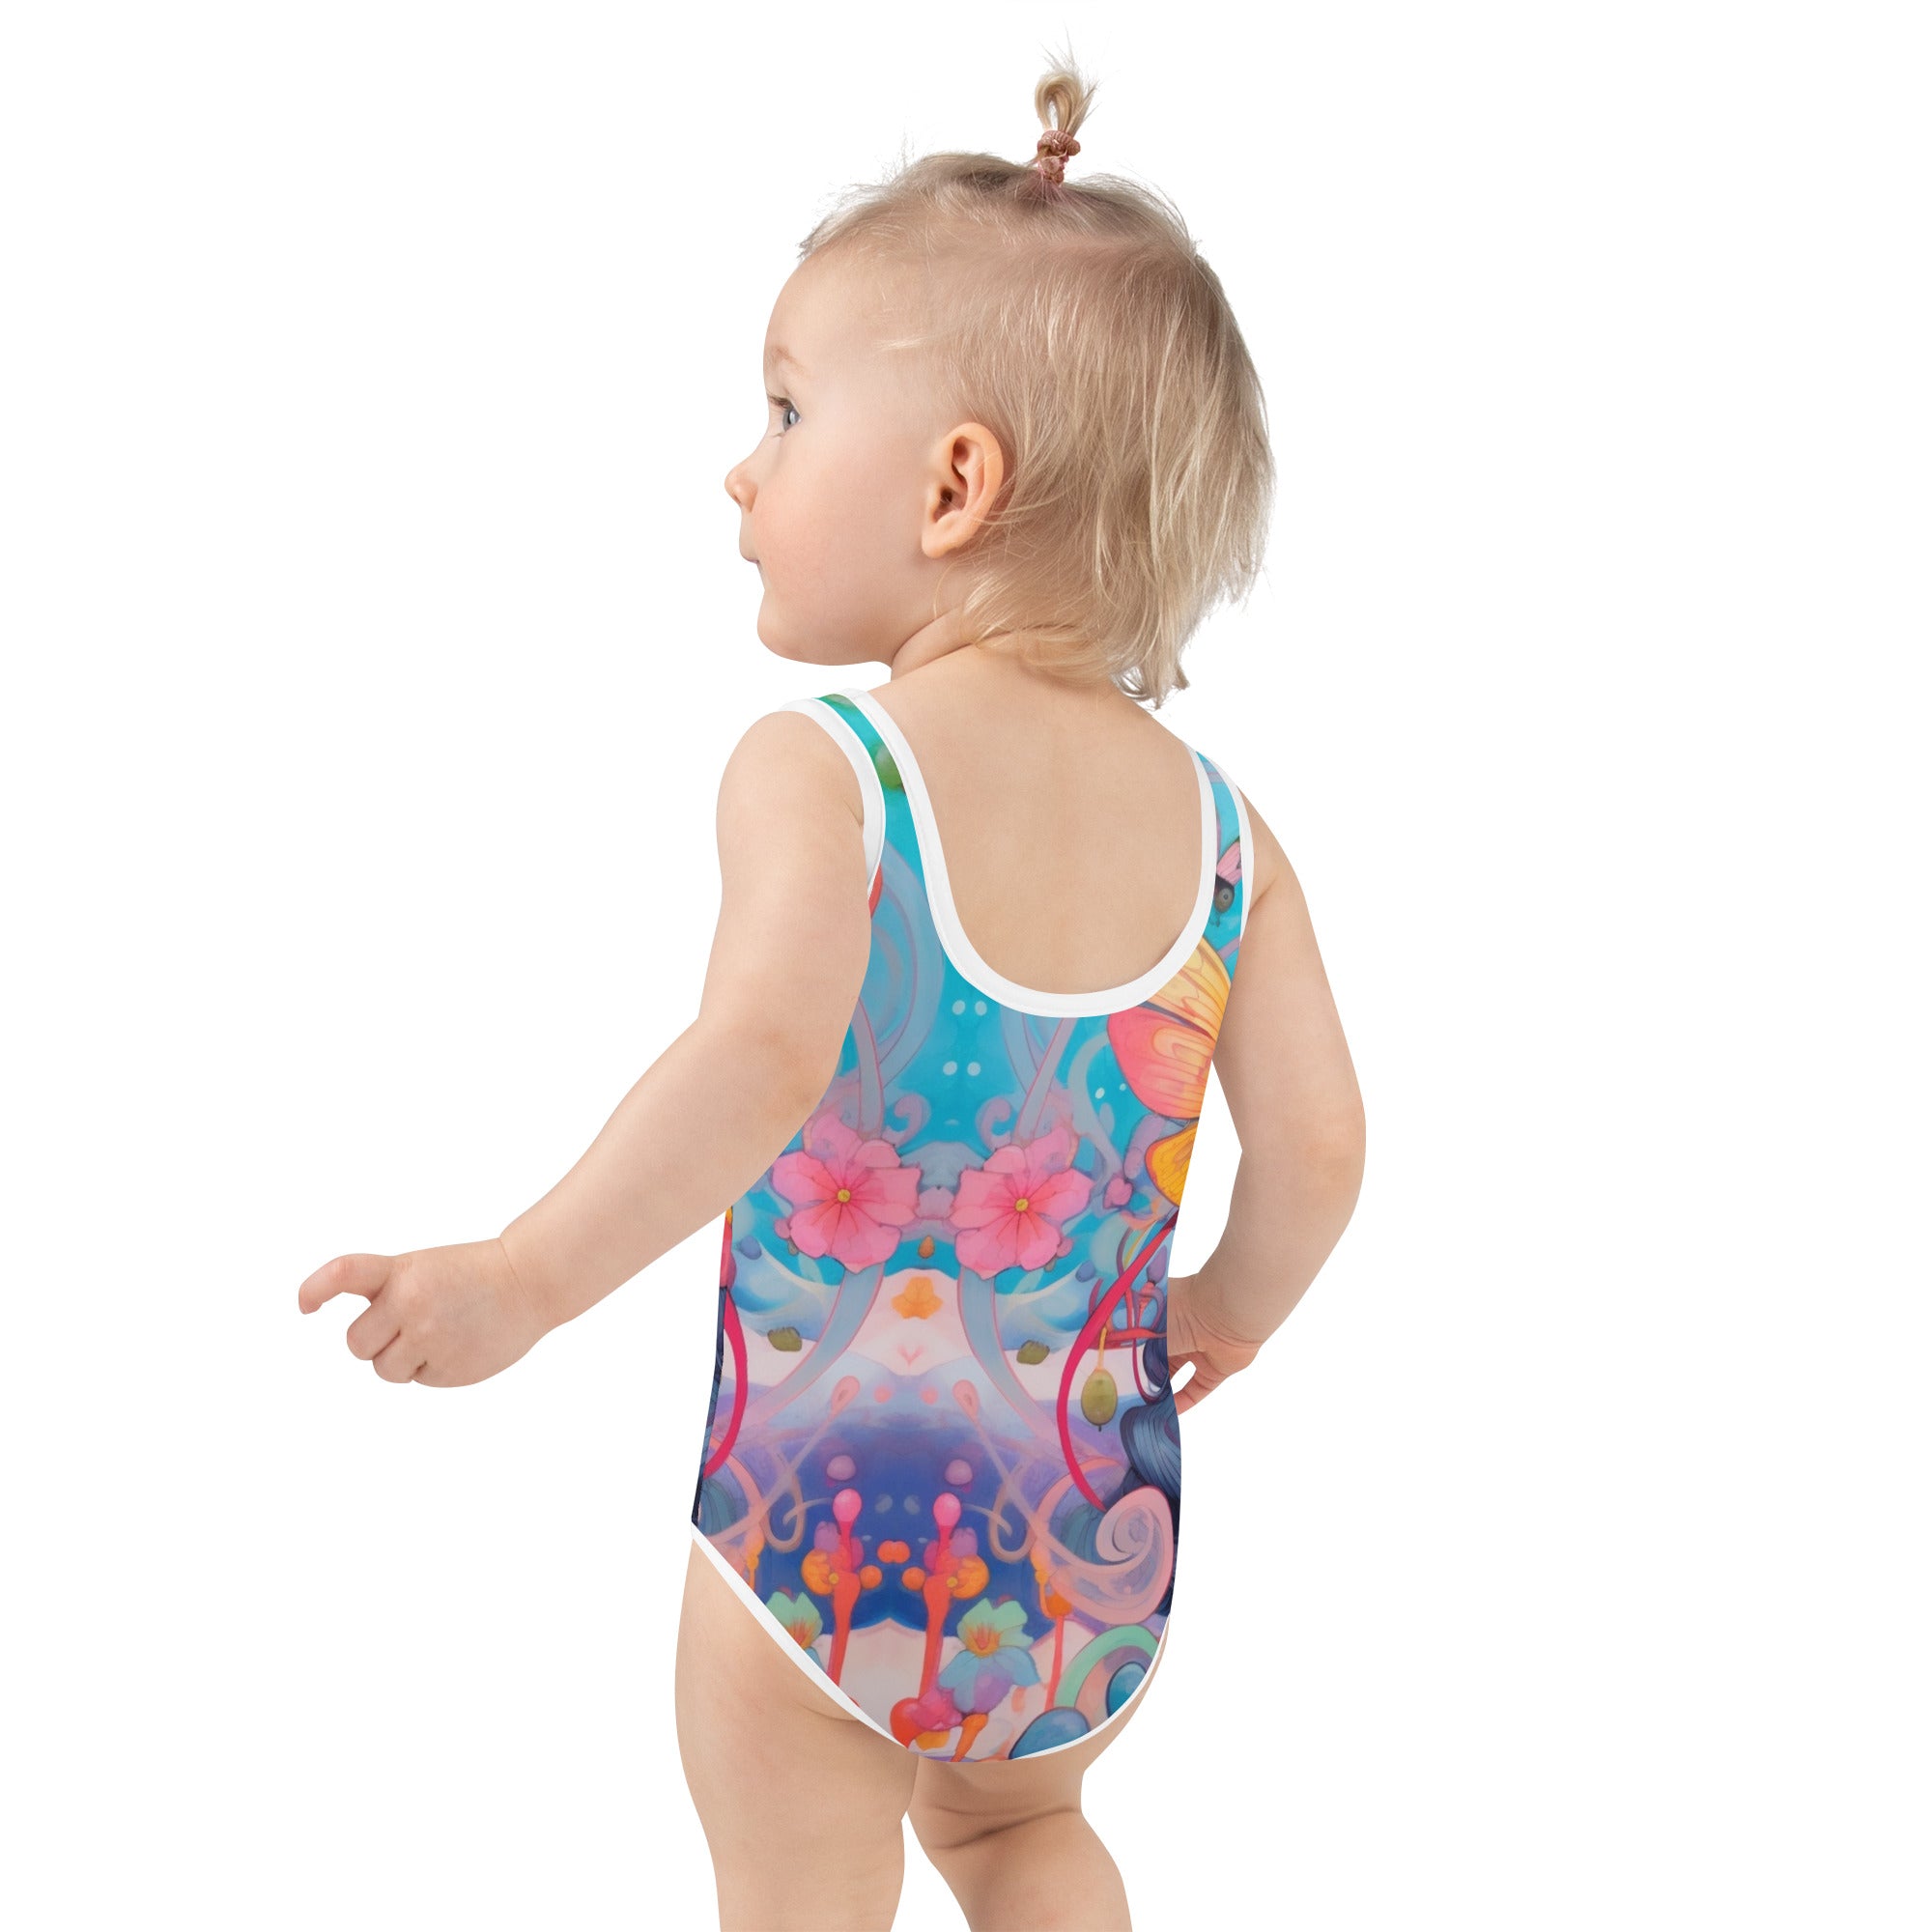 Enchanted Yōsei Fairy Style Girls' Swimsuit - Perfect for Young Princess | Girls Swimsuit | Baby Swimwear | Toddler Swimming Pool Swimsuit